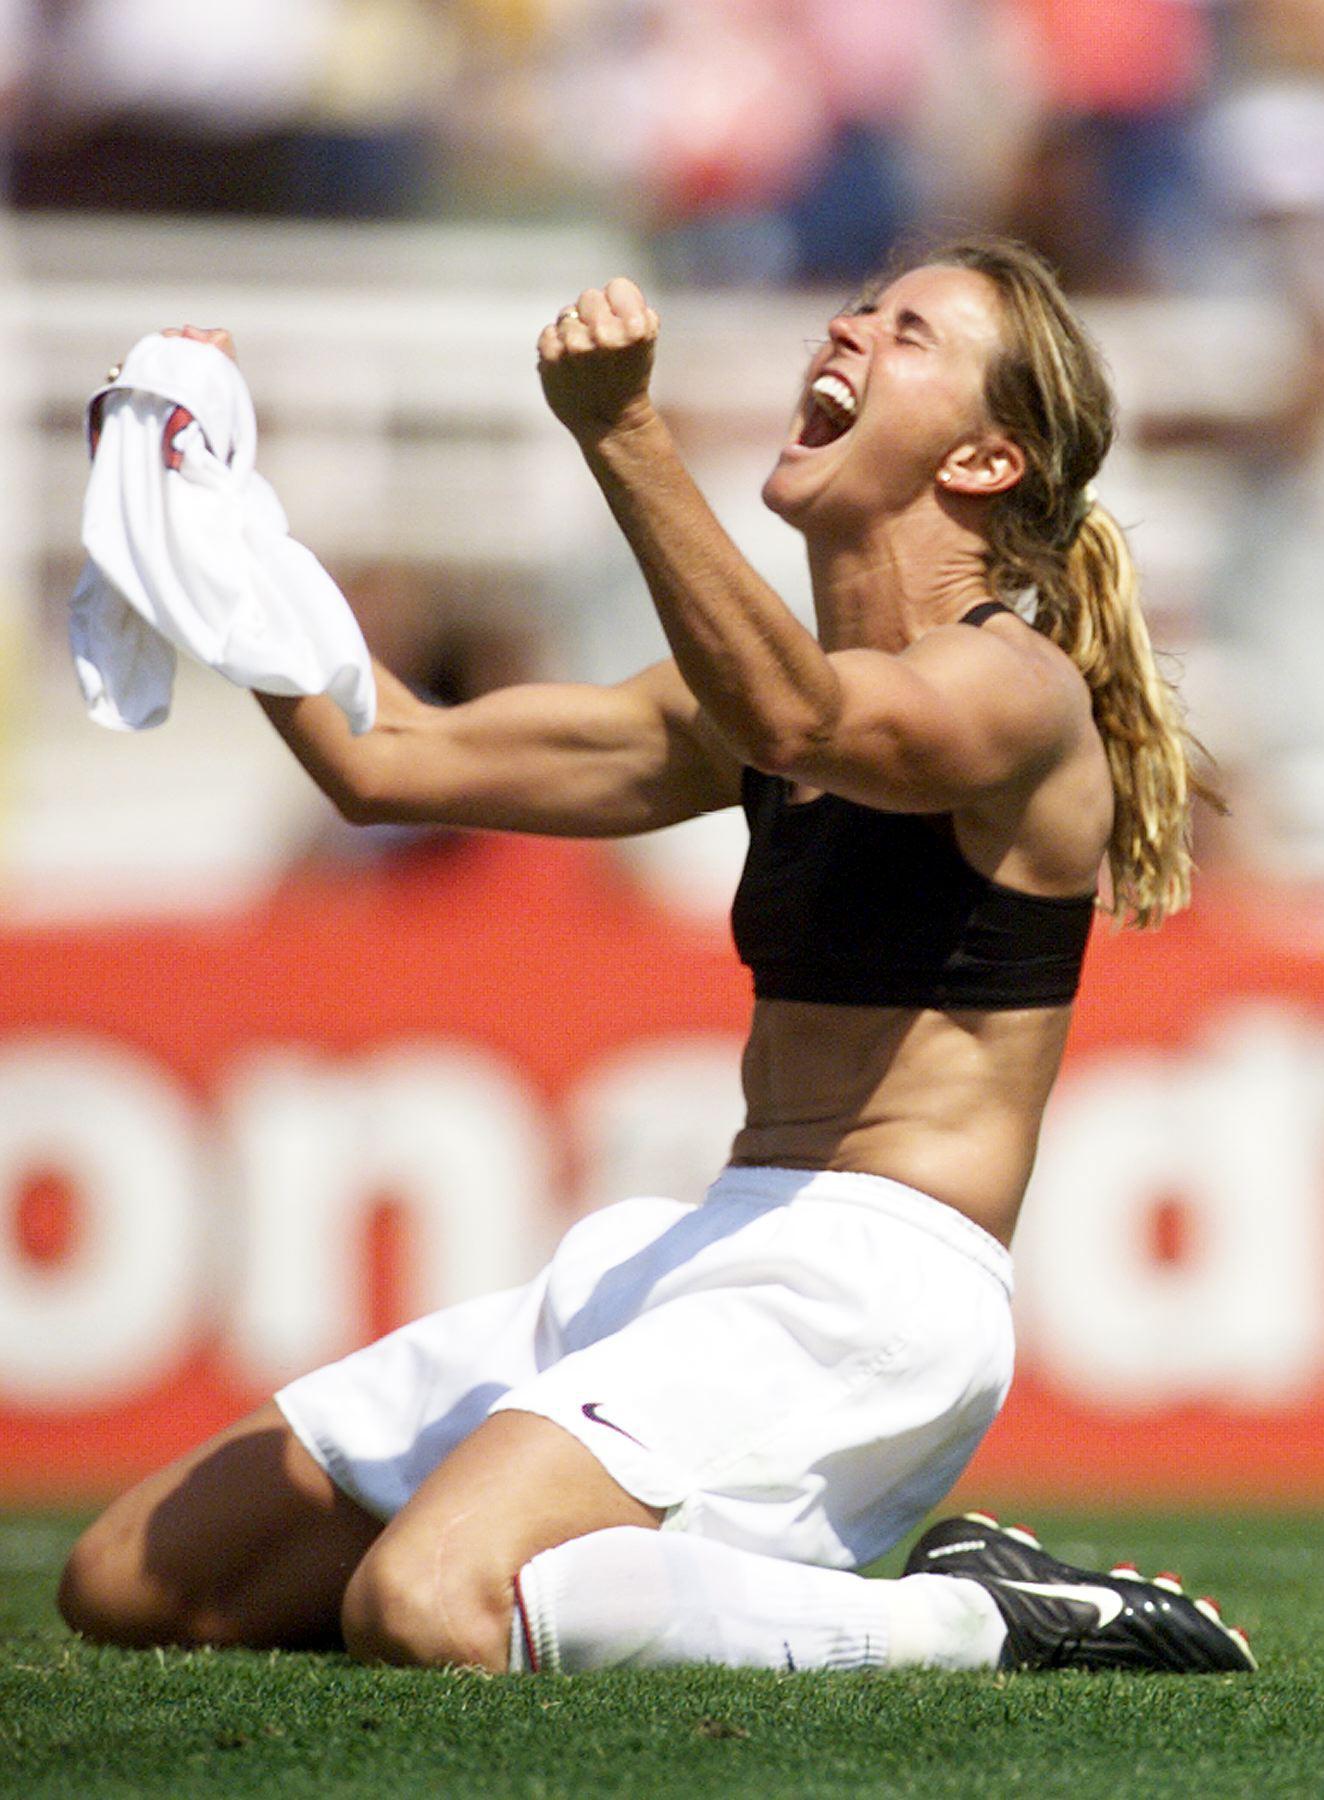 Brandi Chastain celebrates after kicking the winning penalty shot to win the 1999 Women's World Cup final against China on July 10, 1999 at the Rose Bowl in Pasadena. (Roberto Schmidt—AFP/Getty Images)